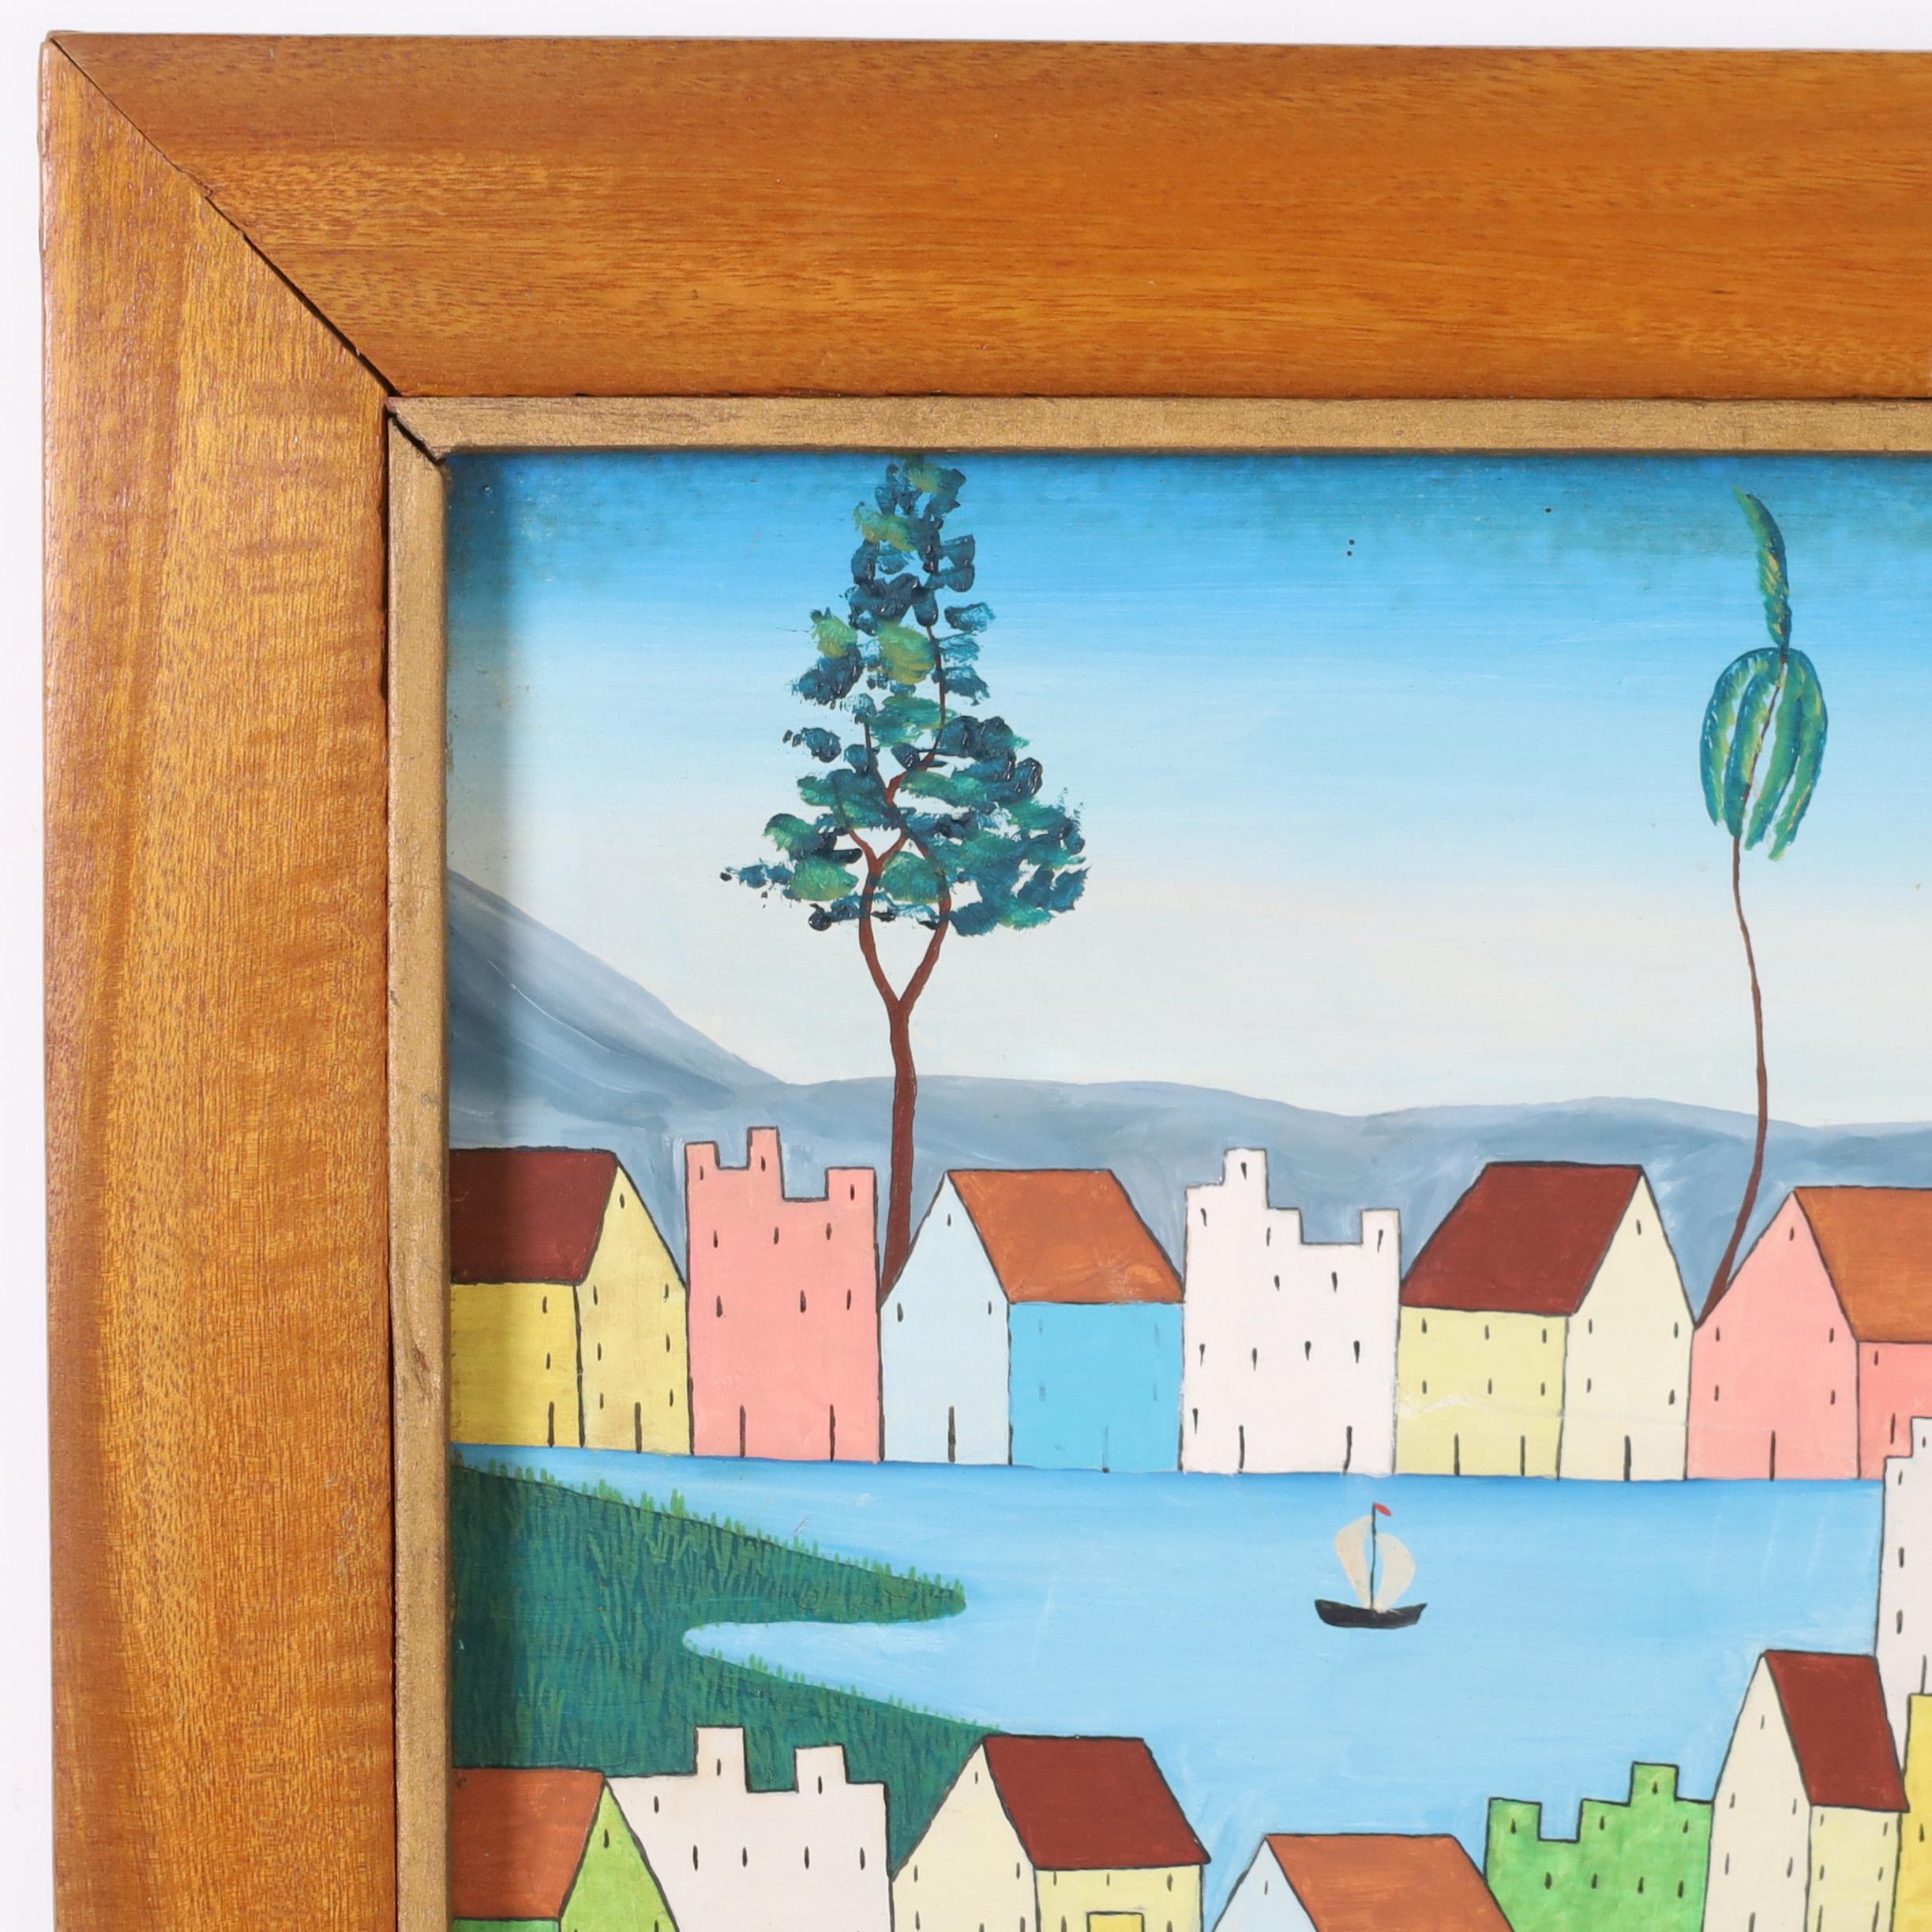 Vintage Haitian acrylic painting on board executed in an unusual minimalist modern style with houses, trees and people. Signed E. Abelard and presented in a mahogany frame.